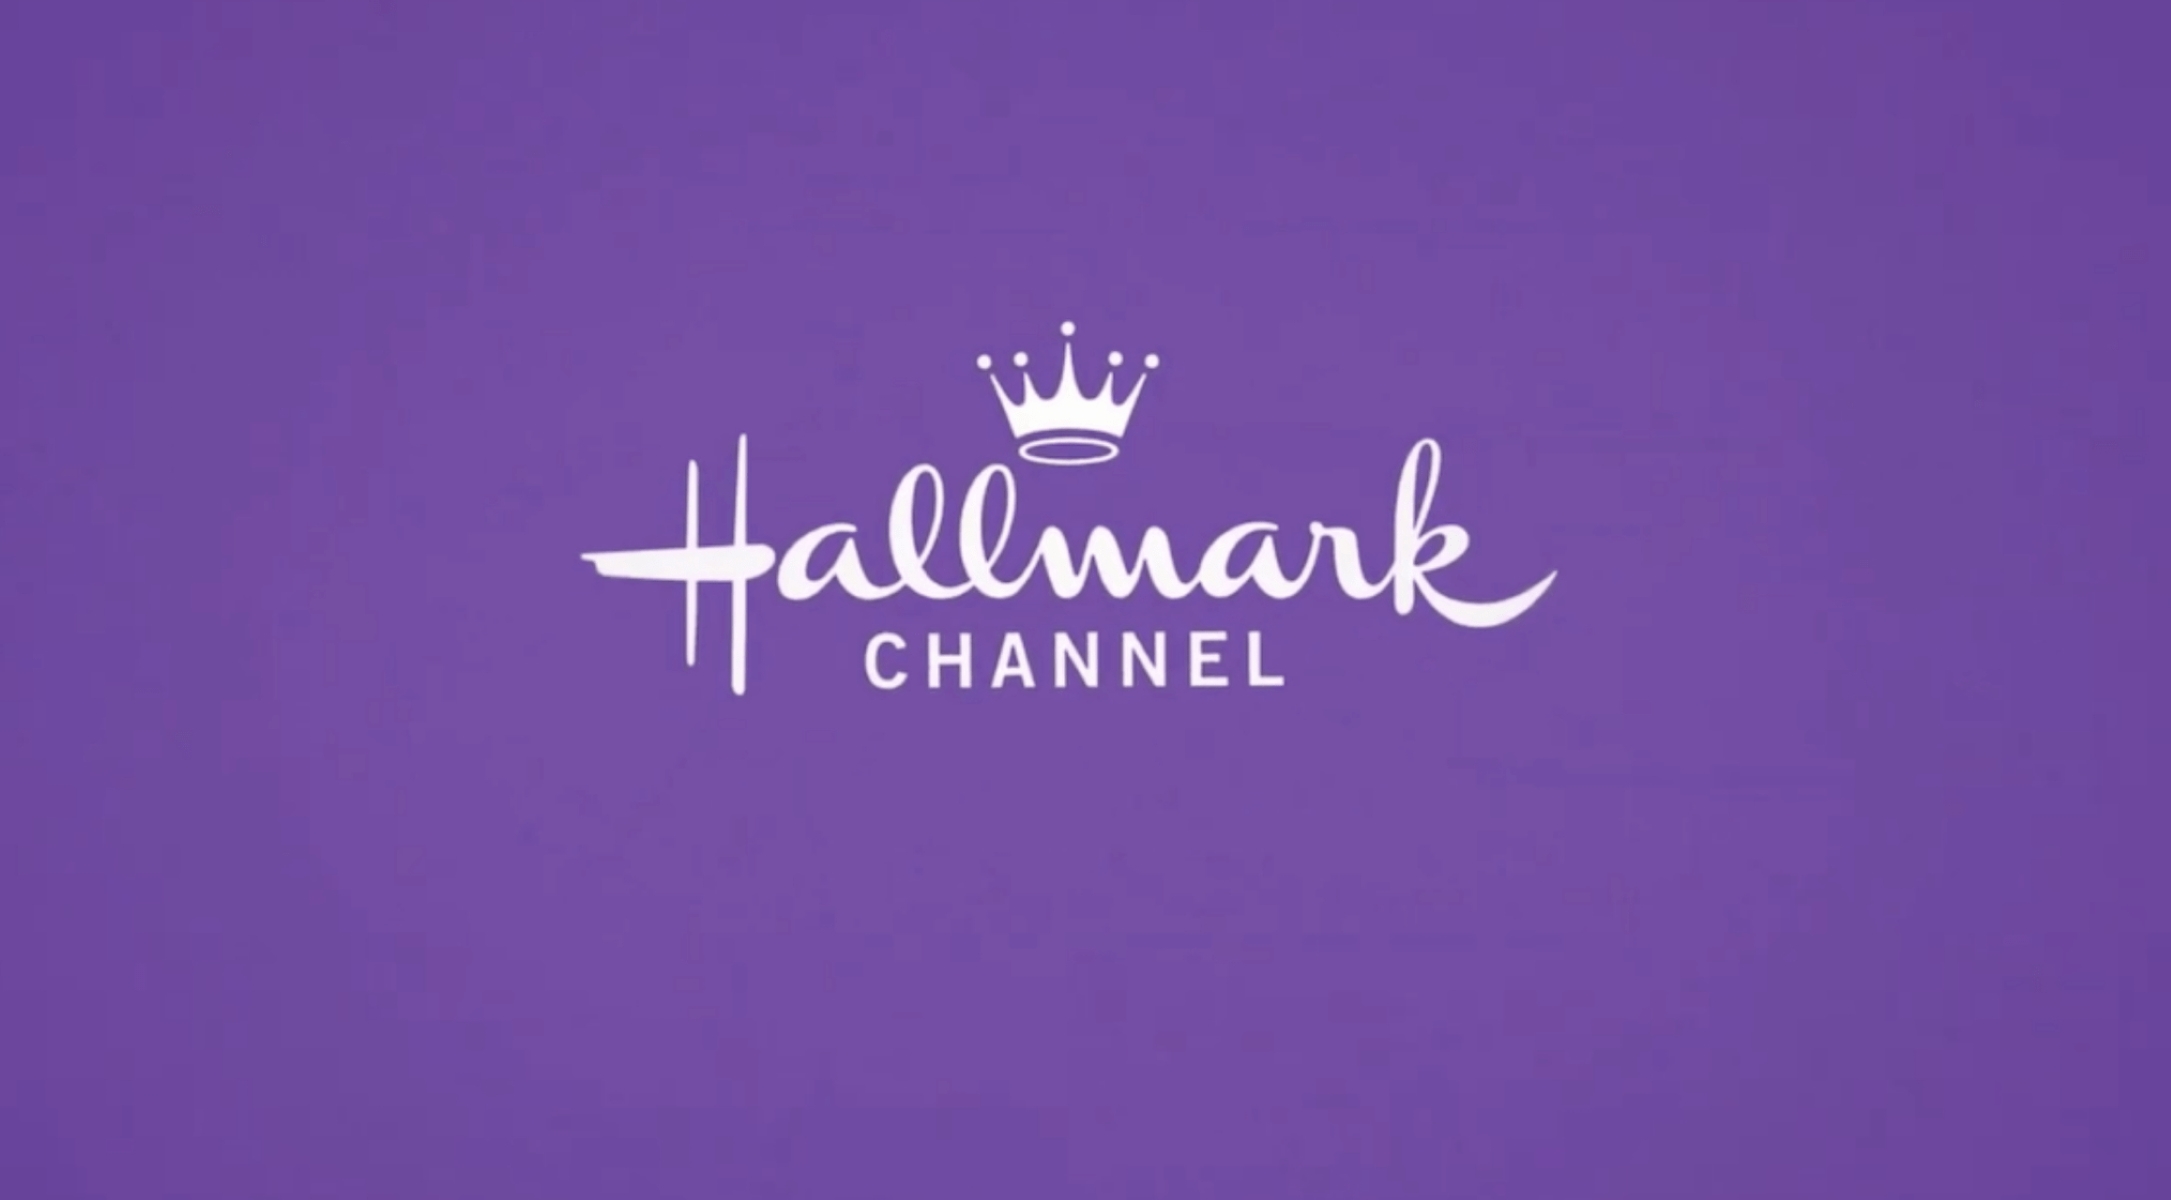 How To Watch The Hallmark Channel